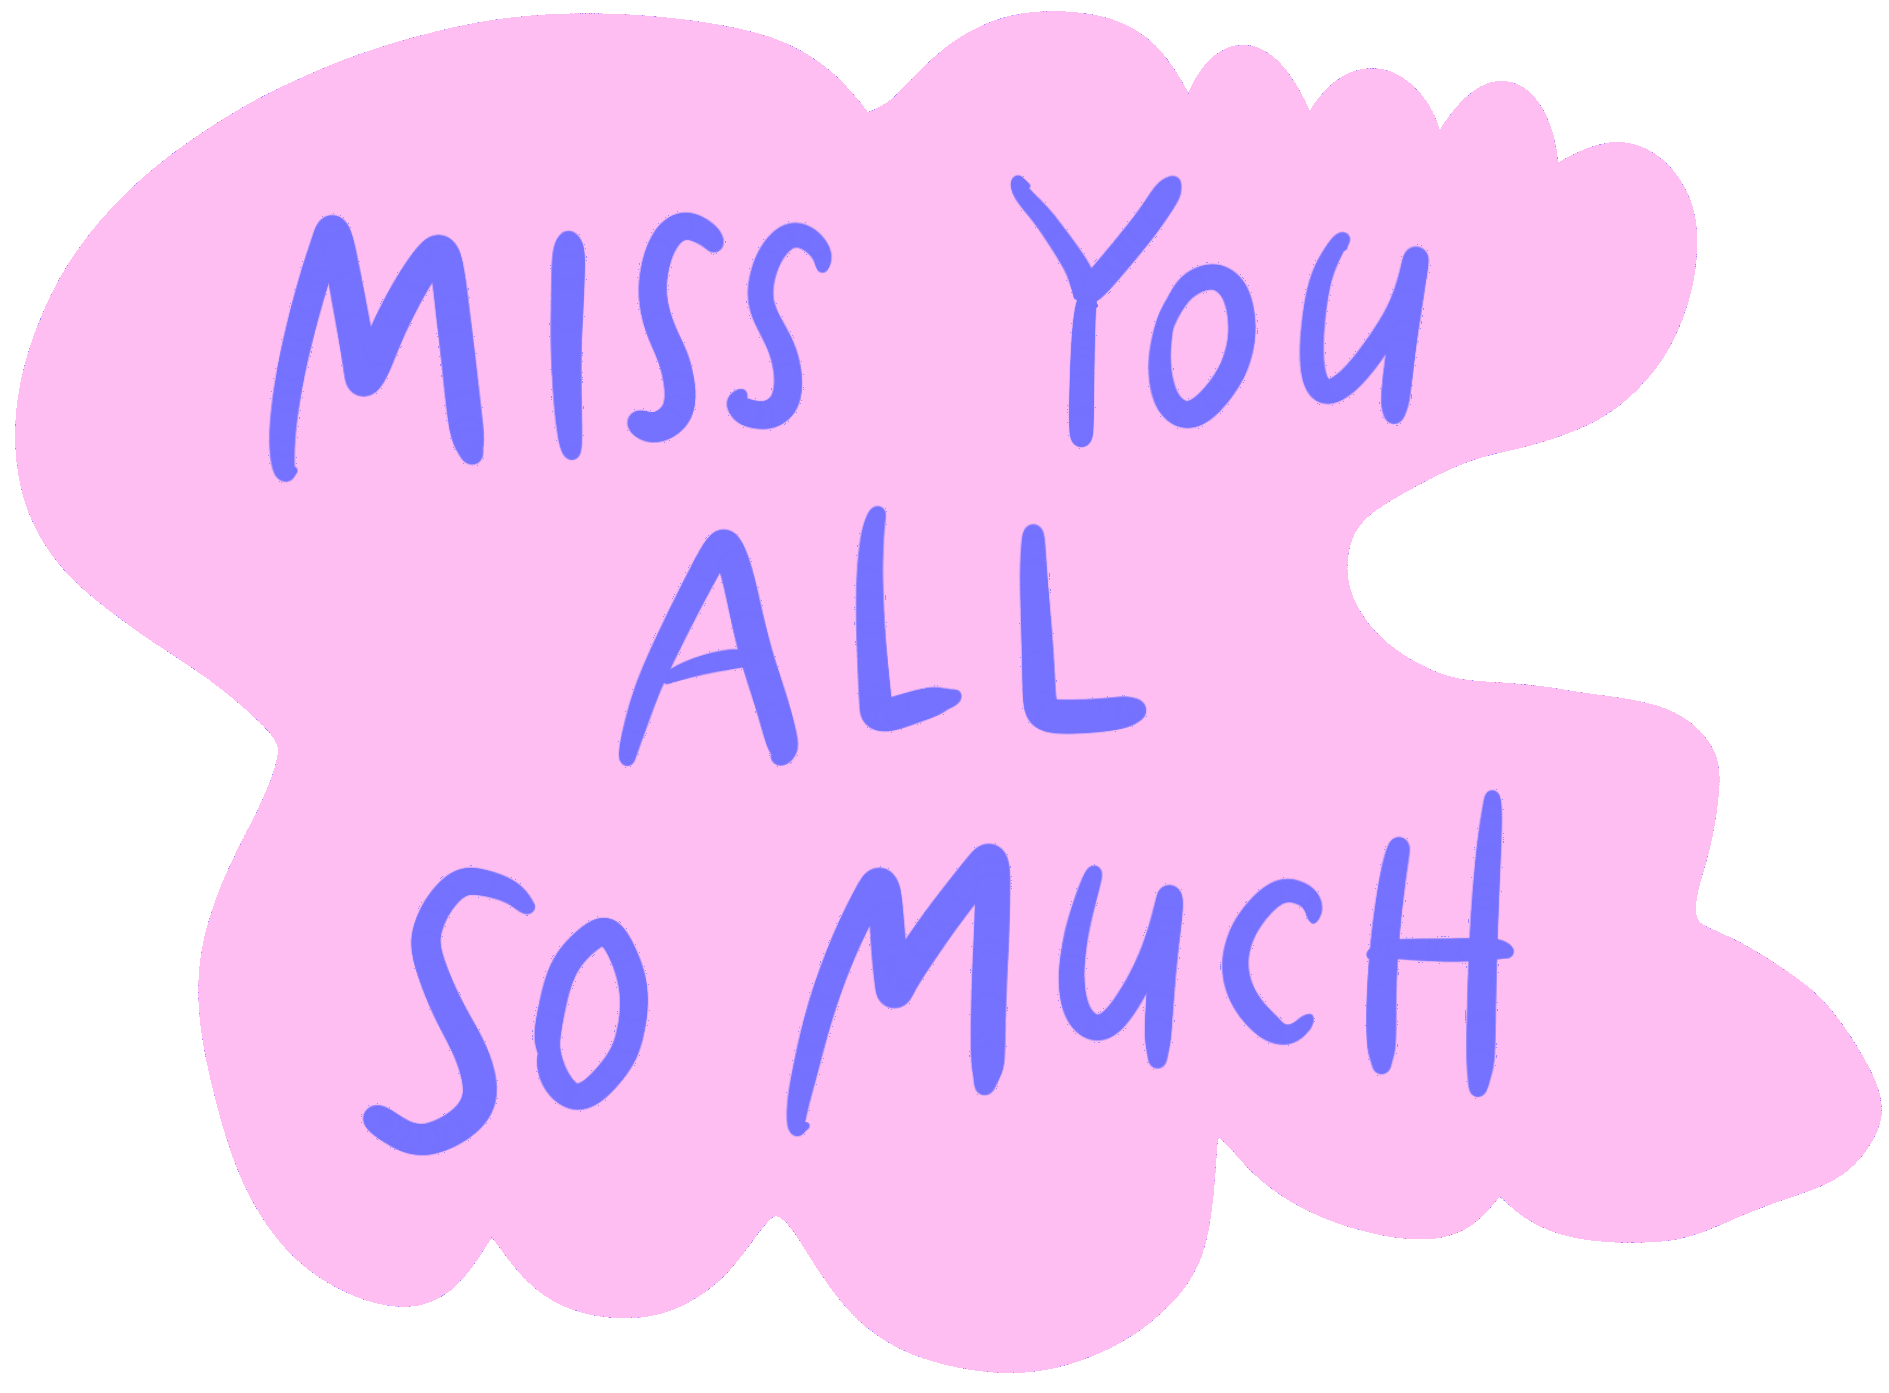 Missing Miss You Sticker by Heather Buchanan for iOS & Android | GIPHY